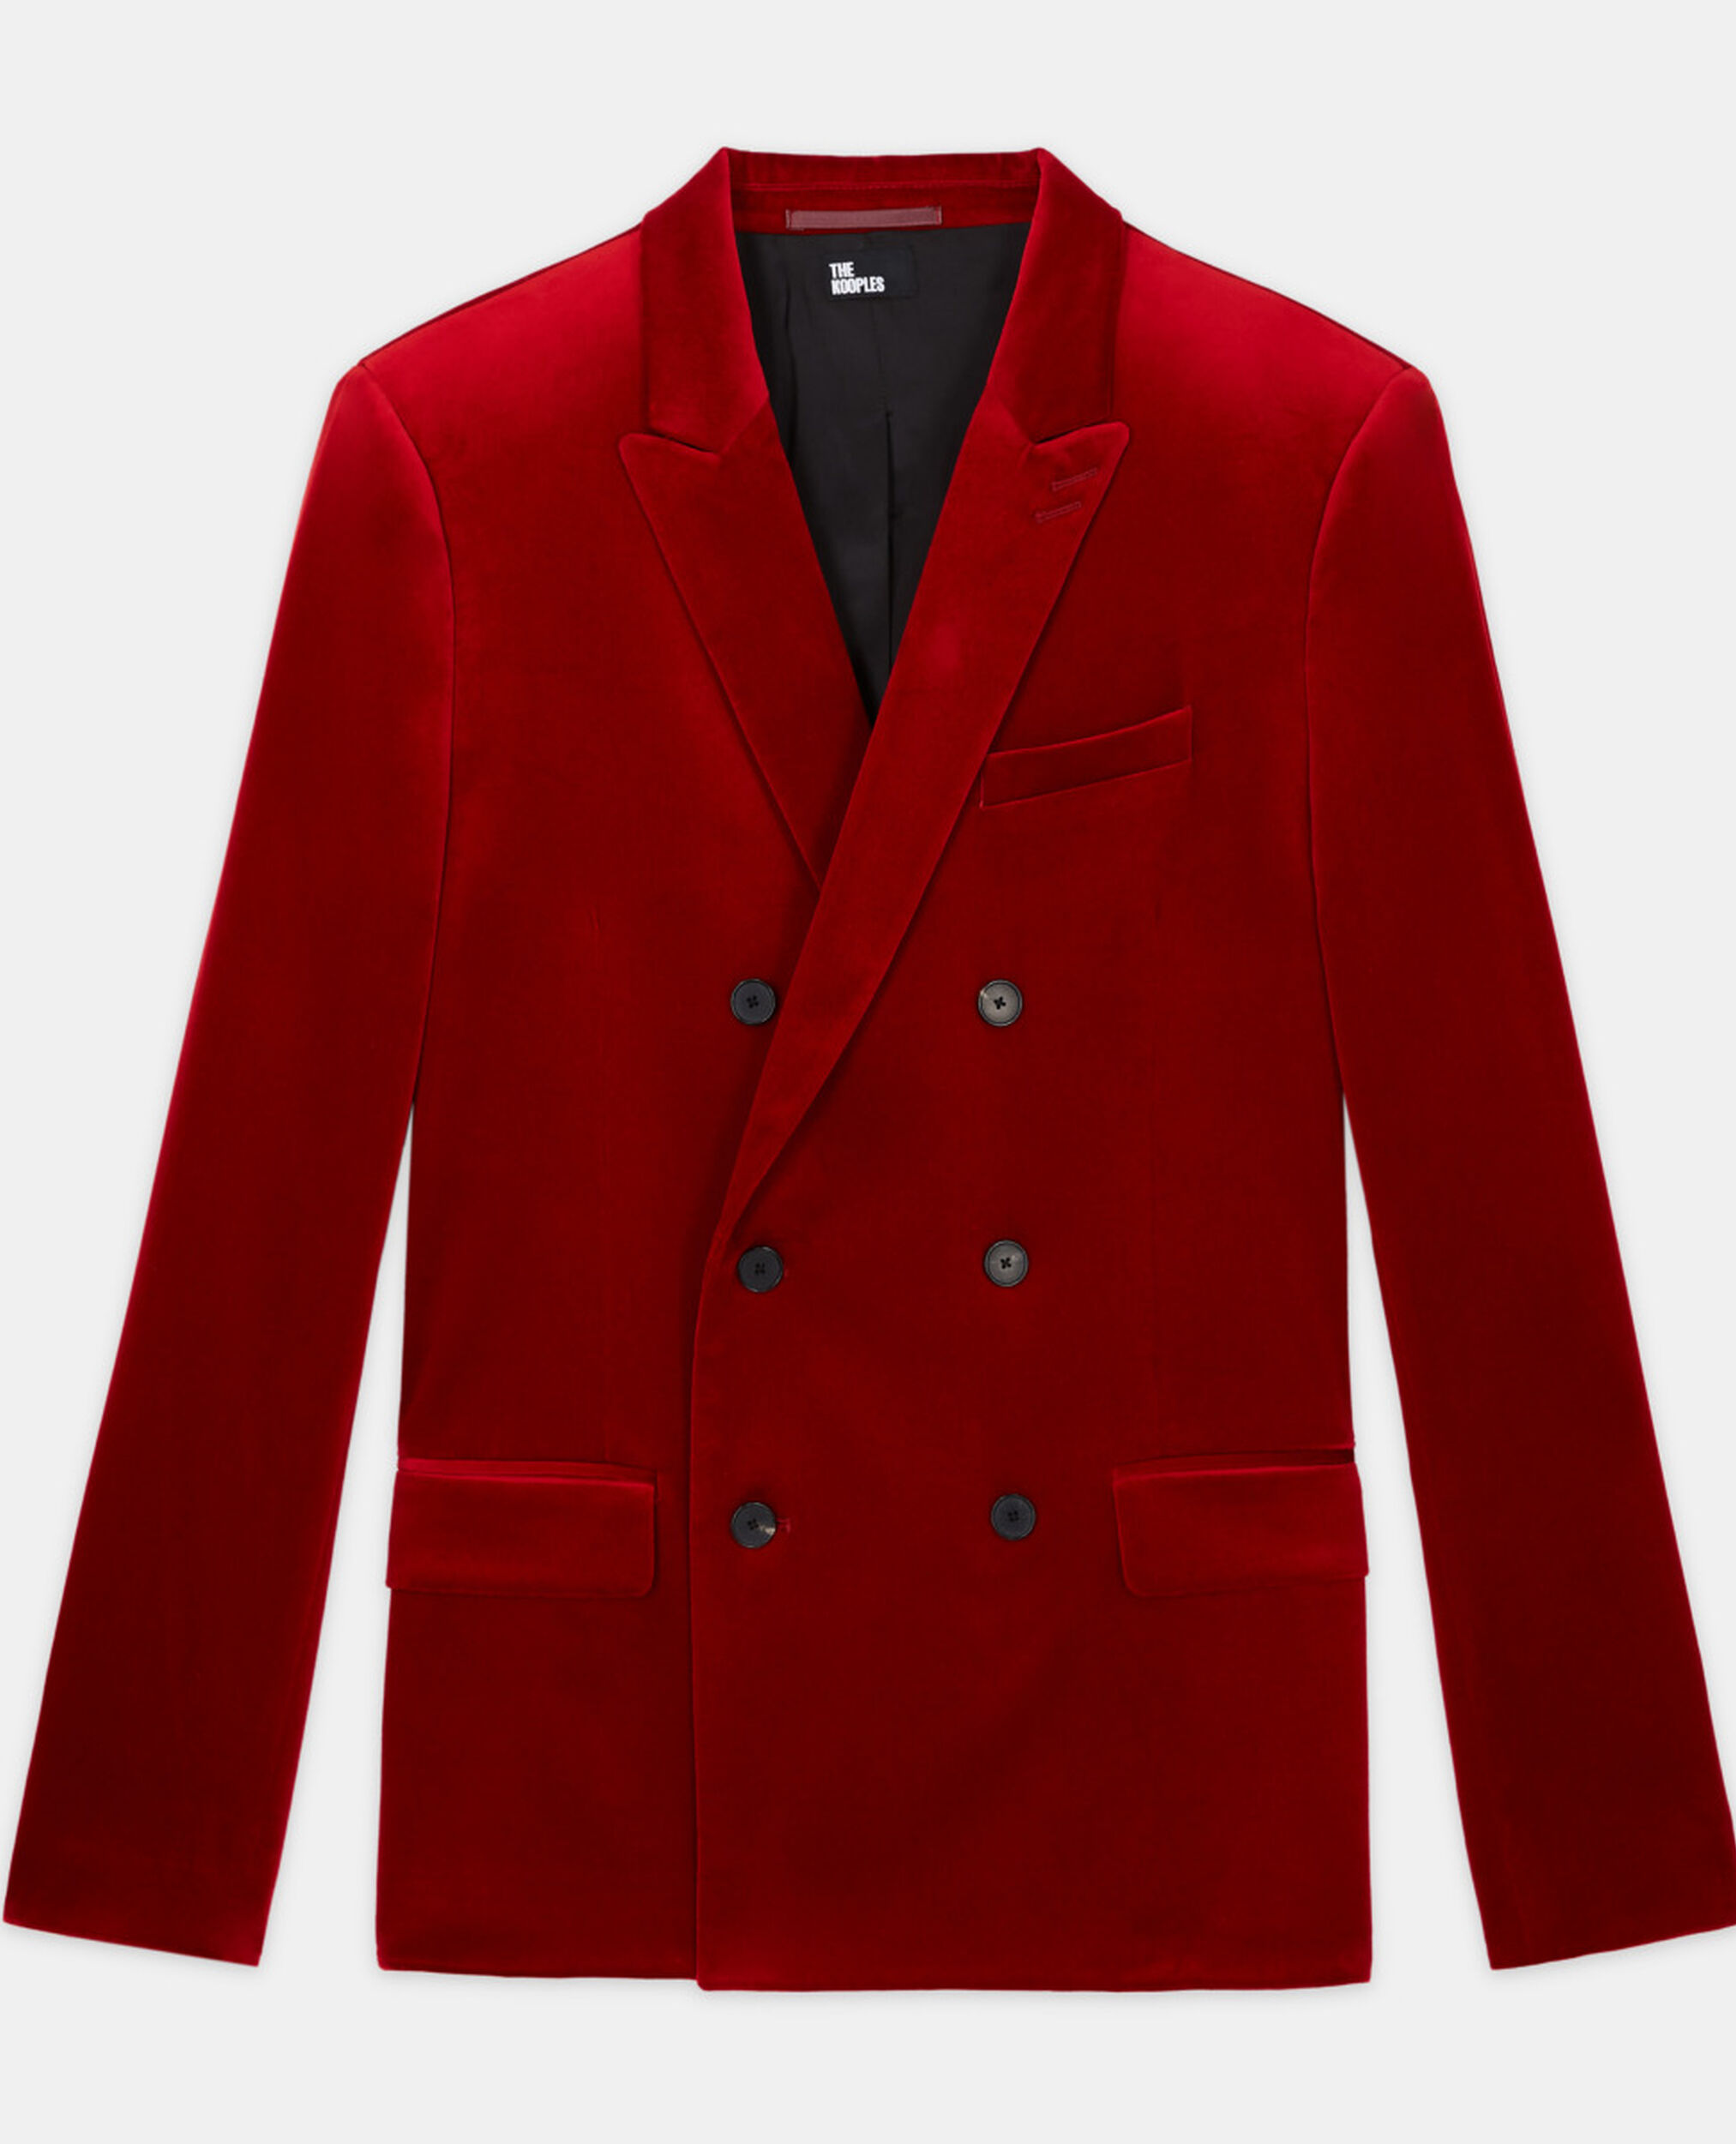 Red double-breasted suit vest, RED, hi-res image number null